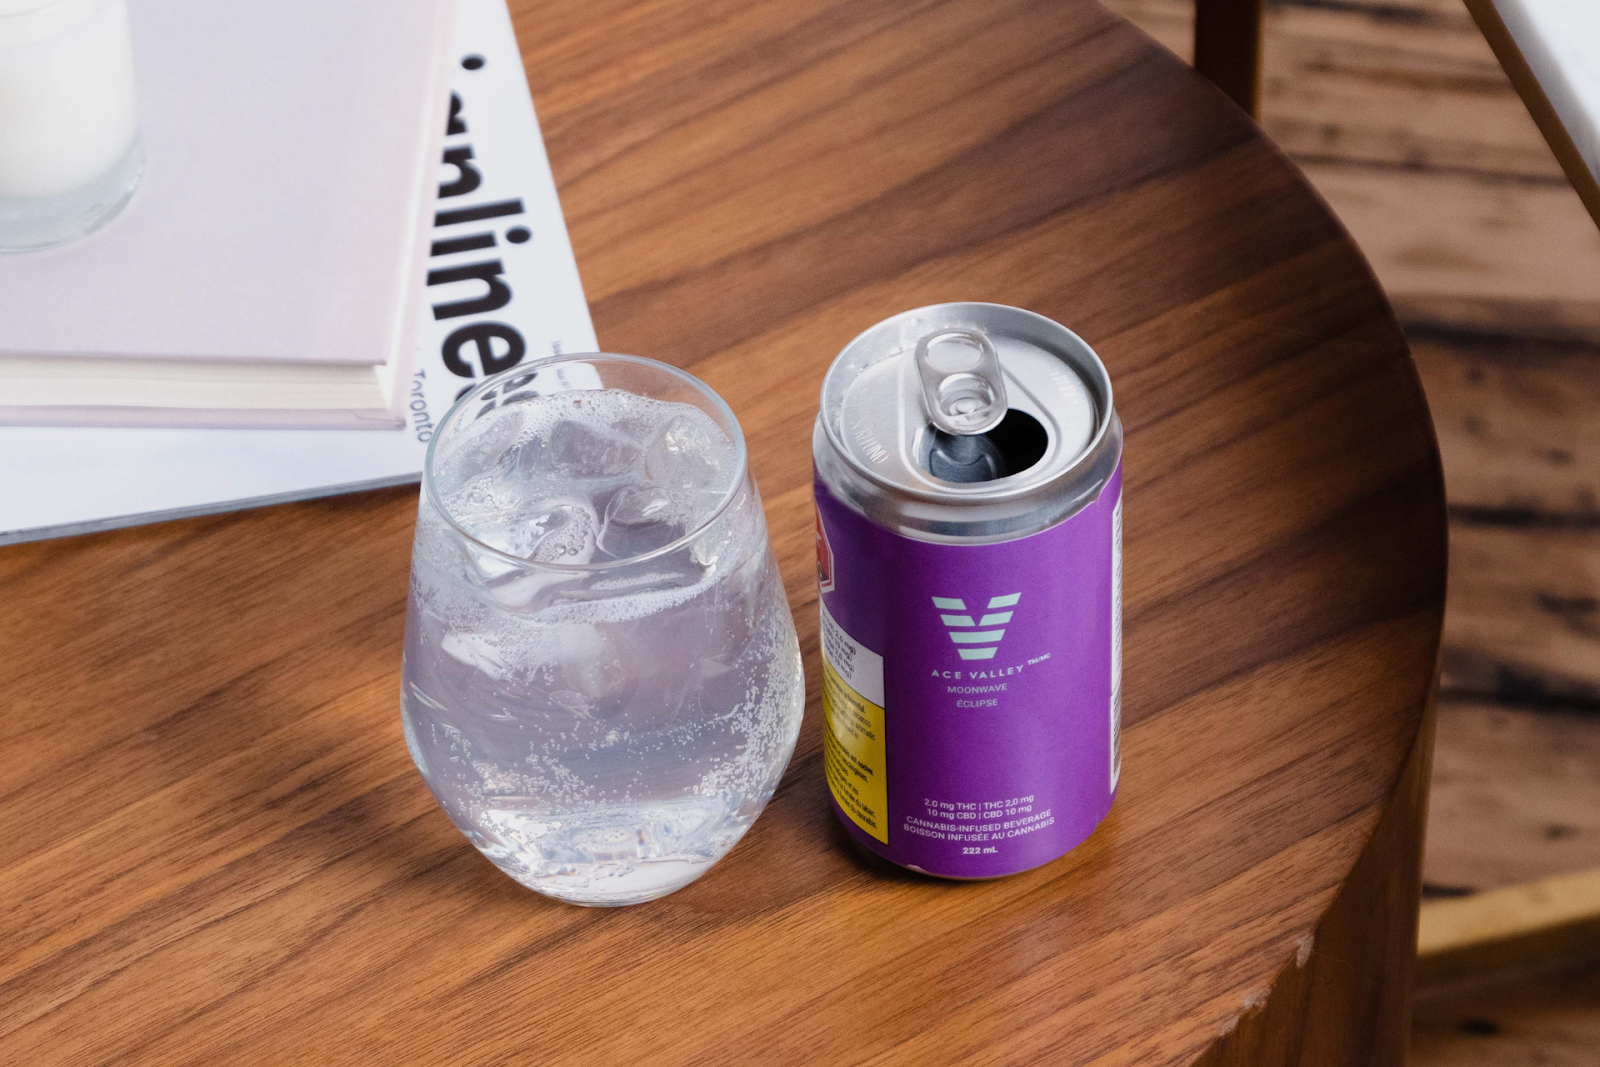 an Ace Valley cannabis beverage poured over ice